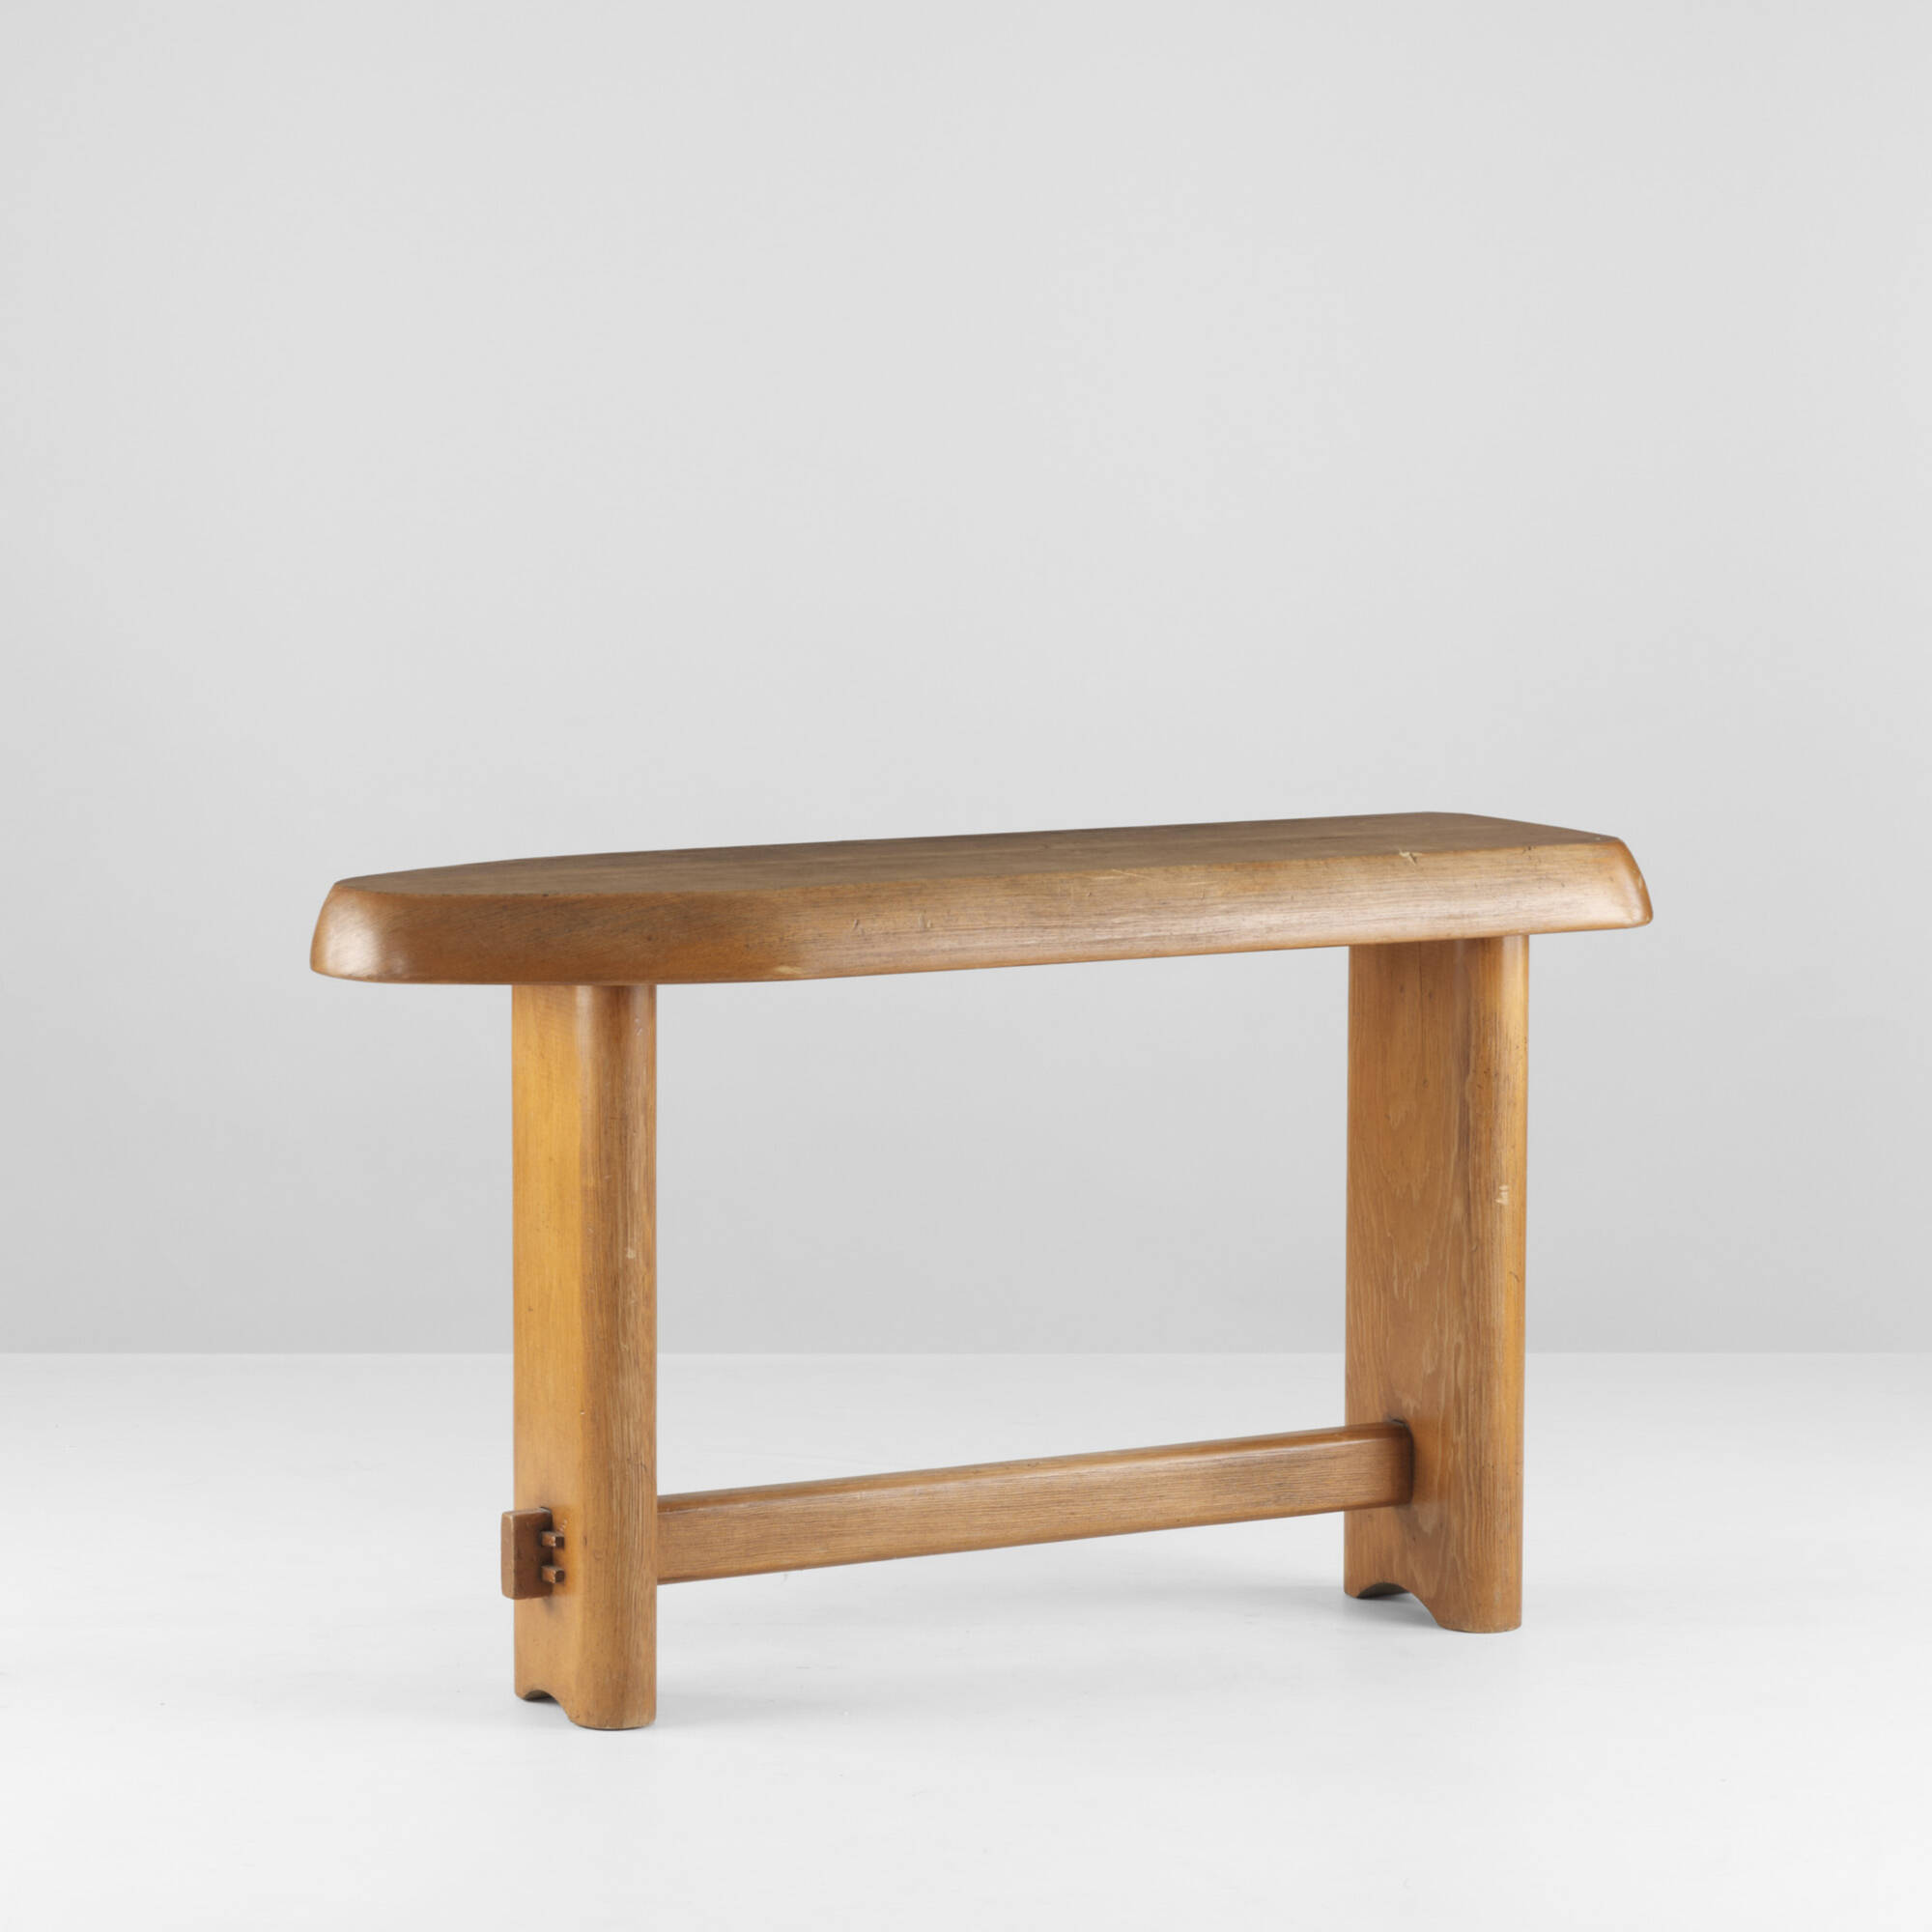 248: CHARLOTTE PERRIAND, Forme Libre dining table < Important